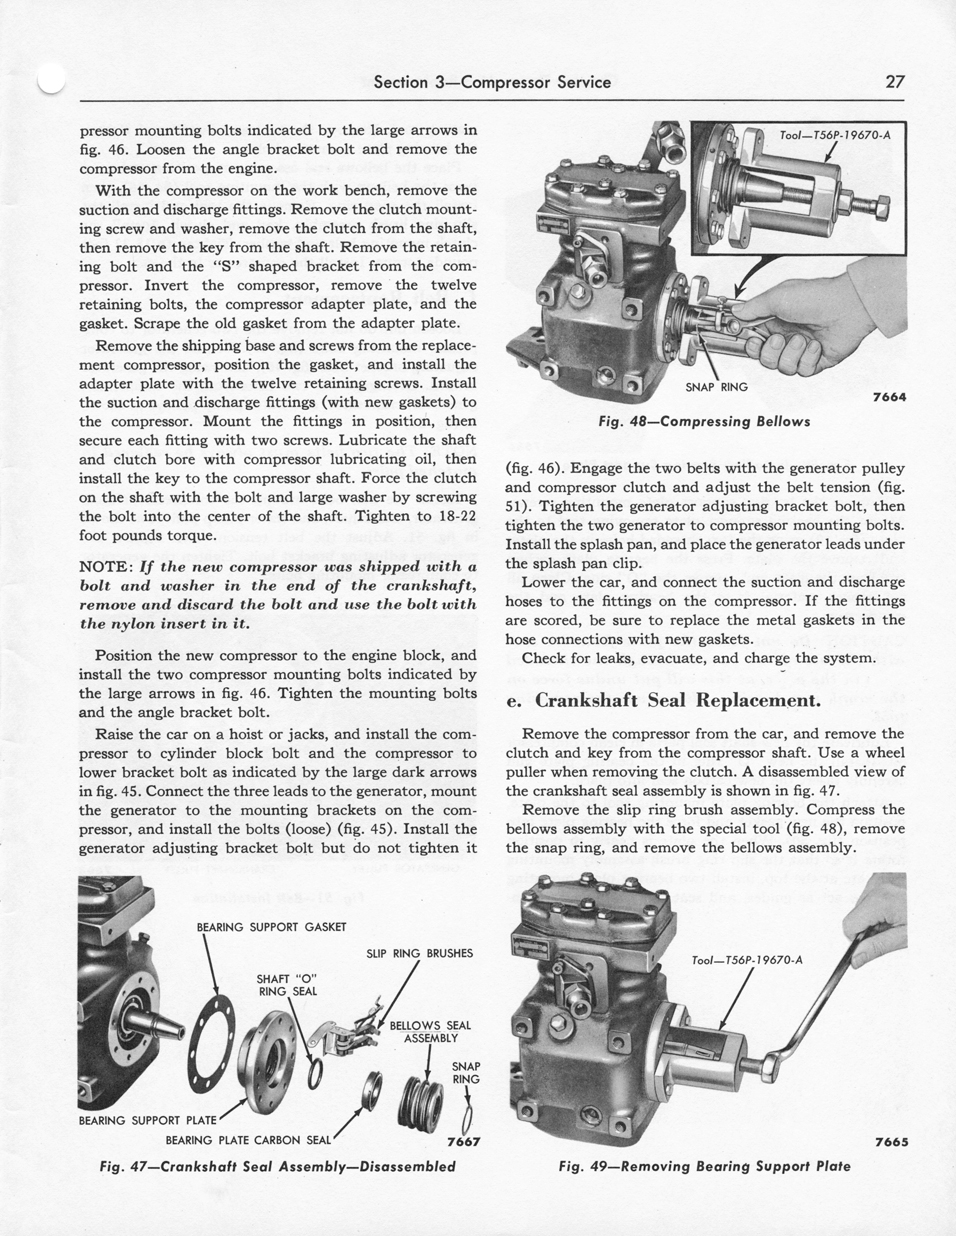 1956 Ford Car Air Conditioning Shop Manual Page 27 - "SelectAire Conditioner"